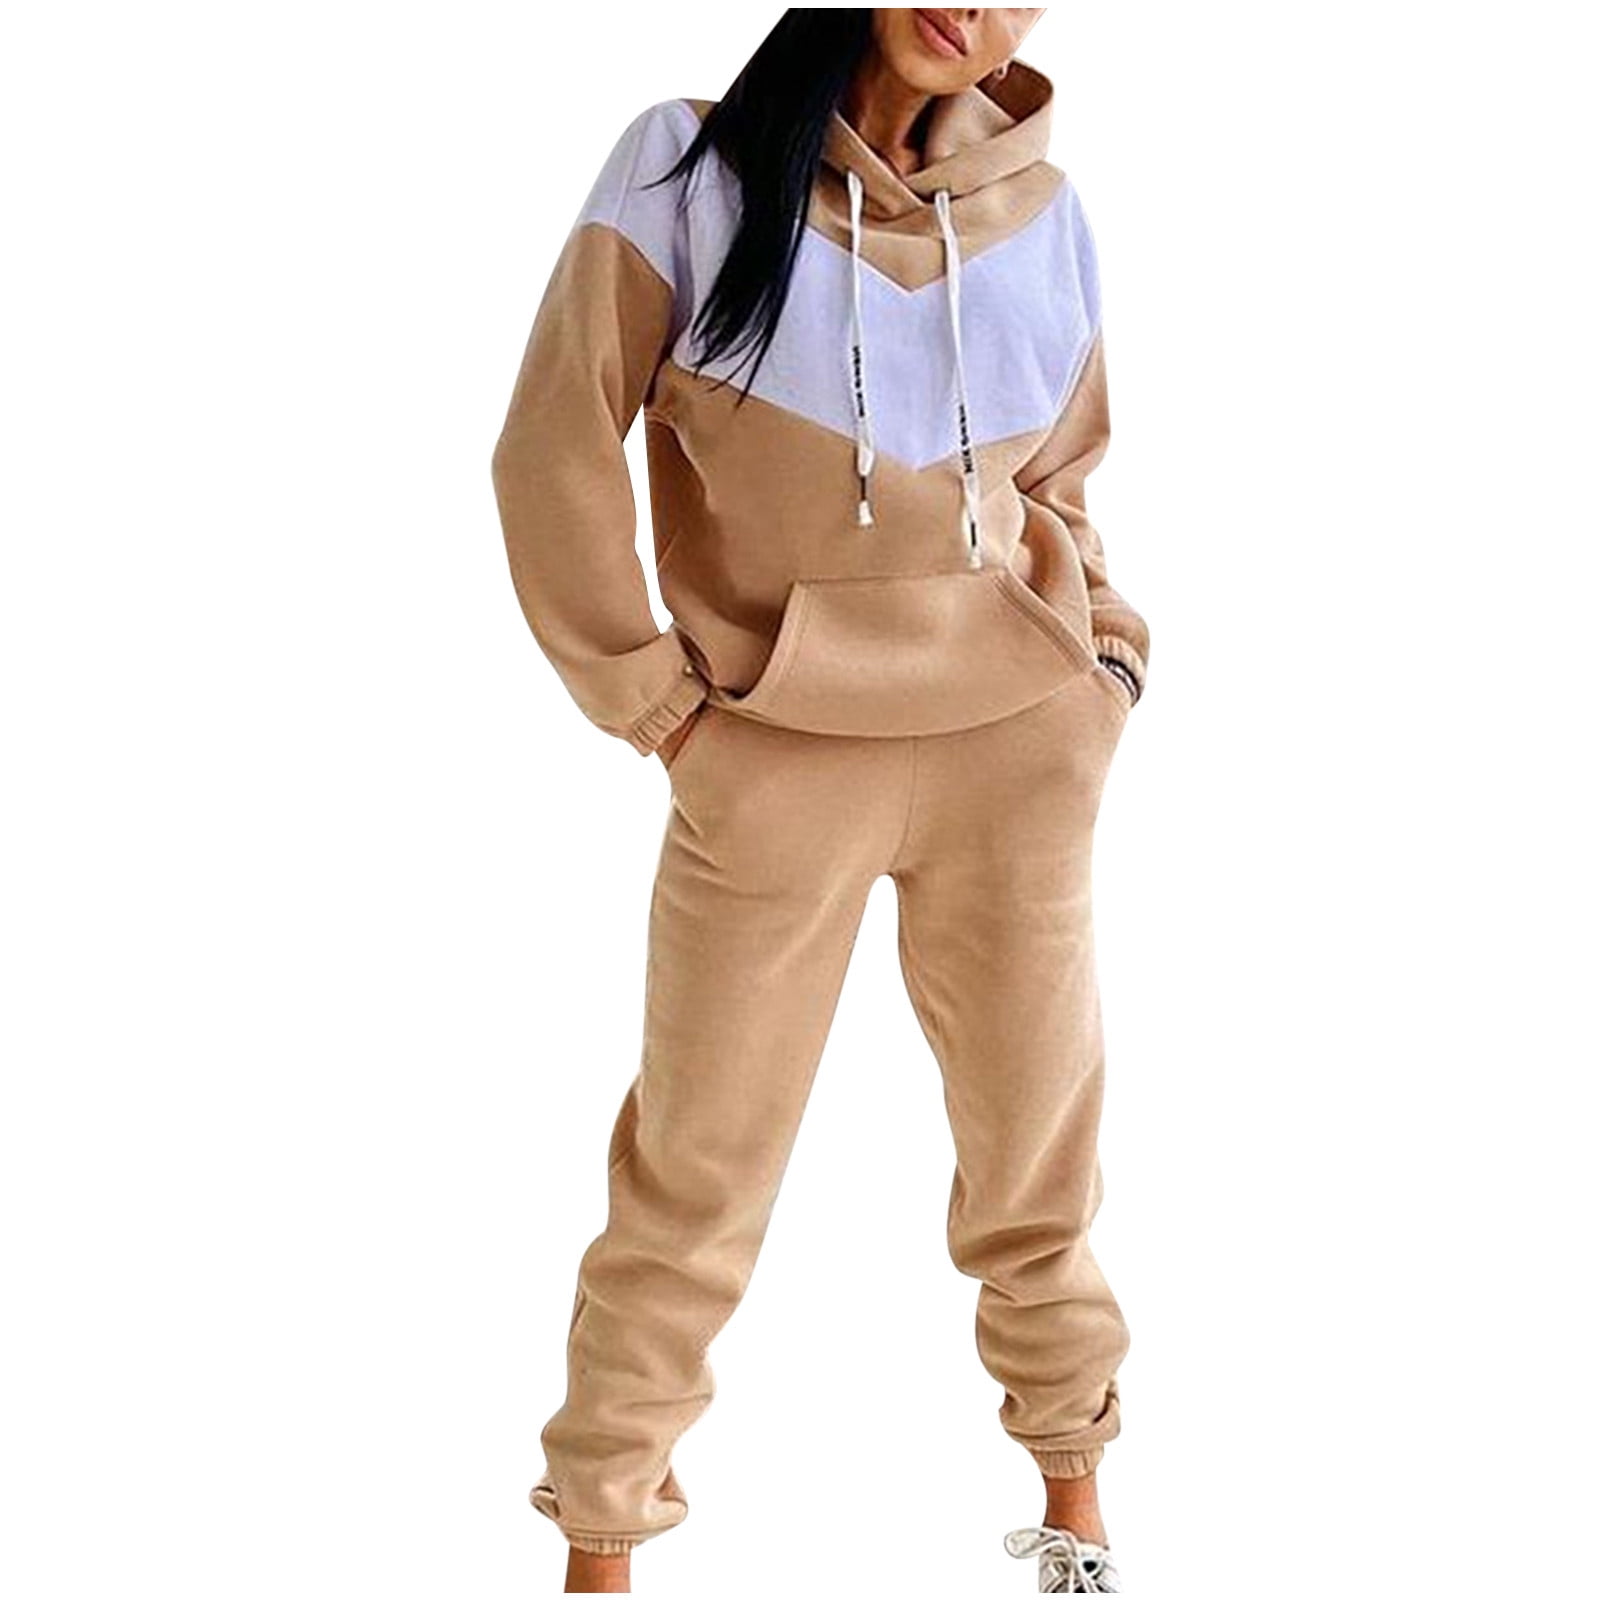 RQYYD Women's Jogging Suits Sets Hoodies Tracksuit Long Sleeve